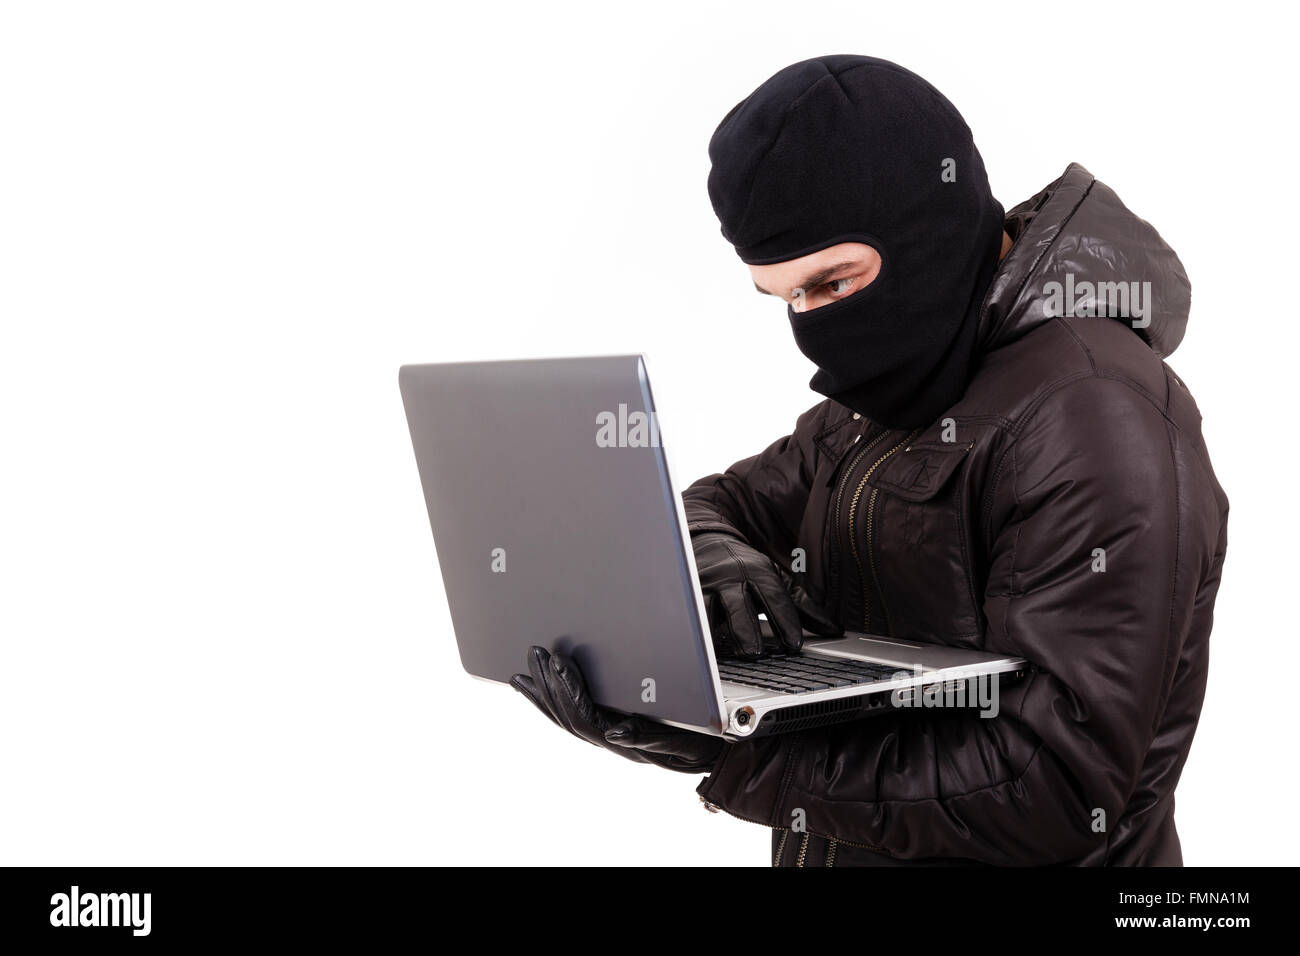 Computer Hacker stealing information from a laptop, isolated over white background Stock Photo